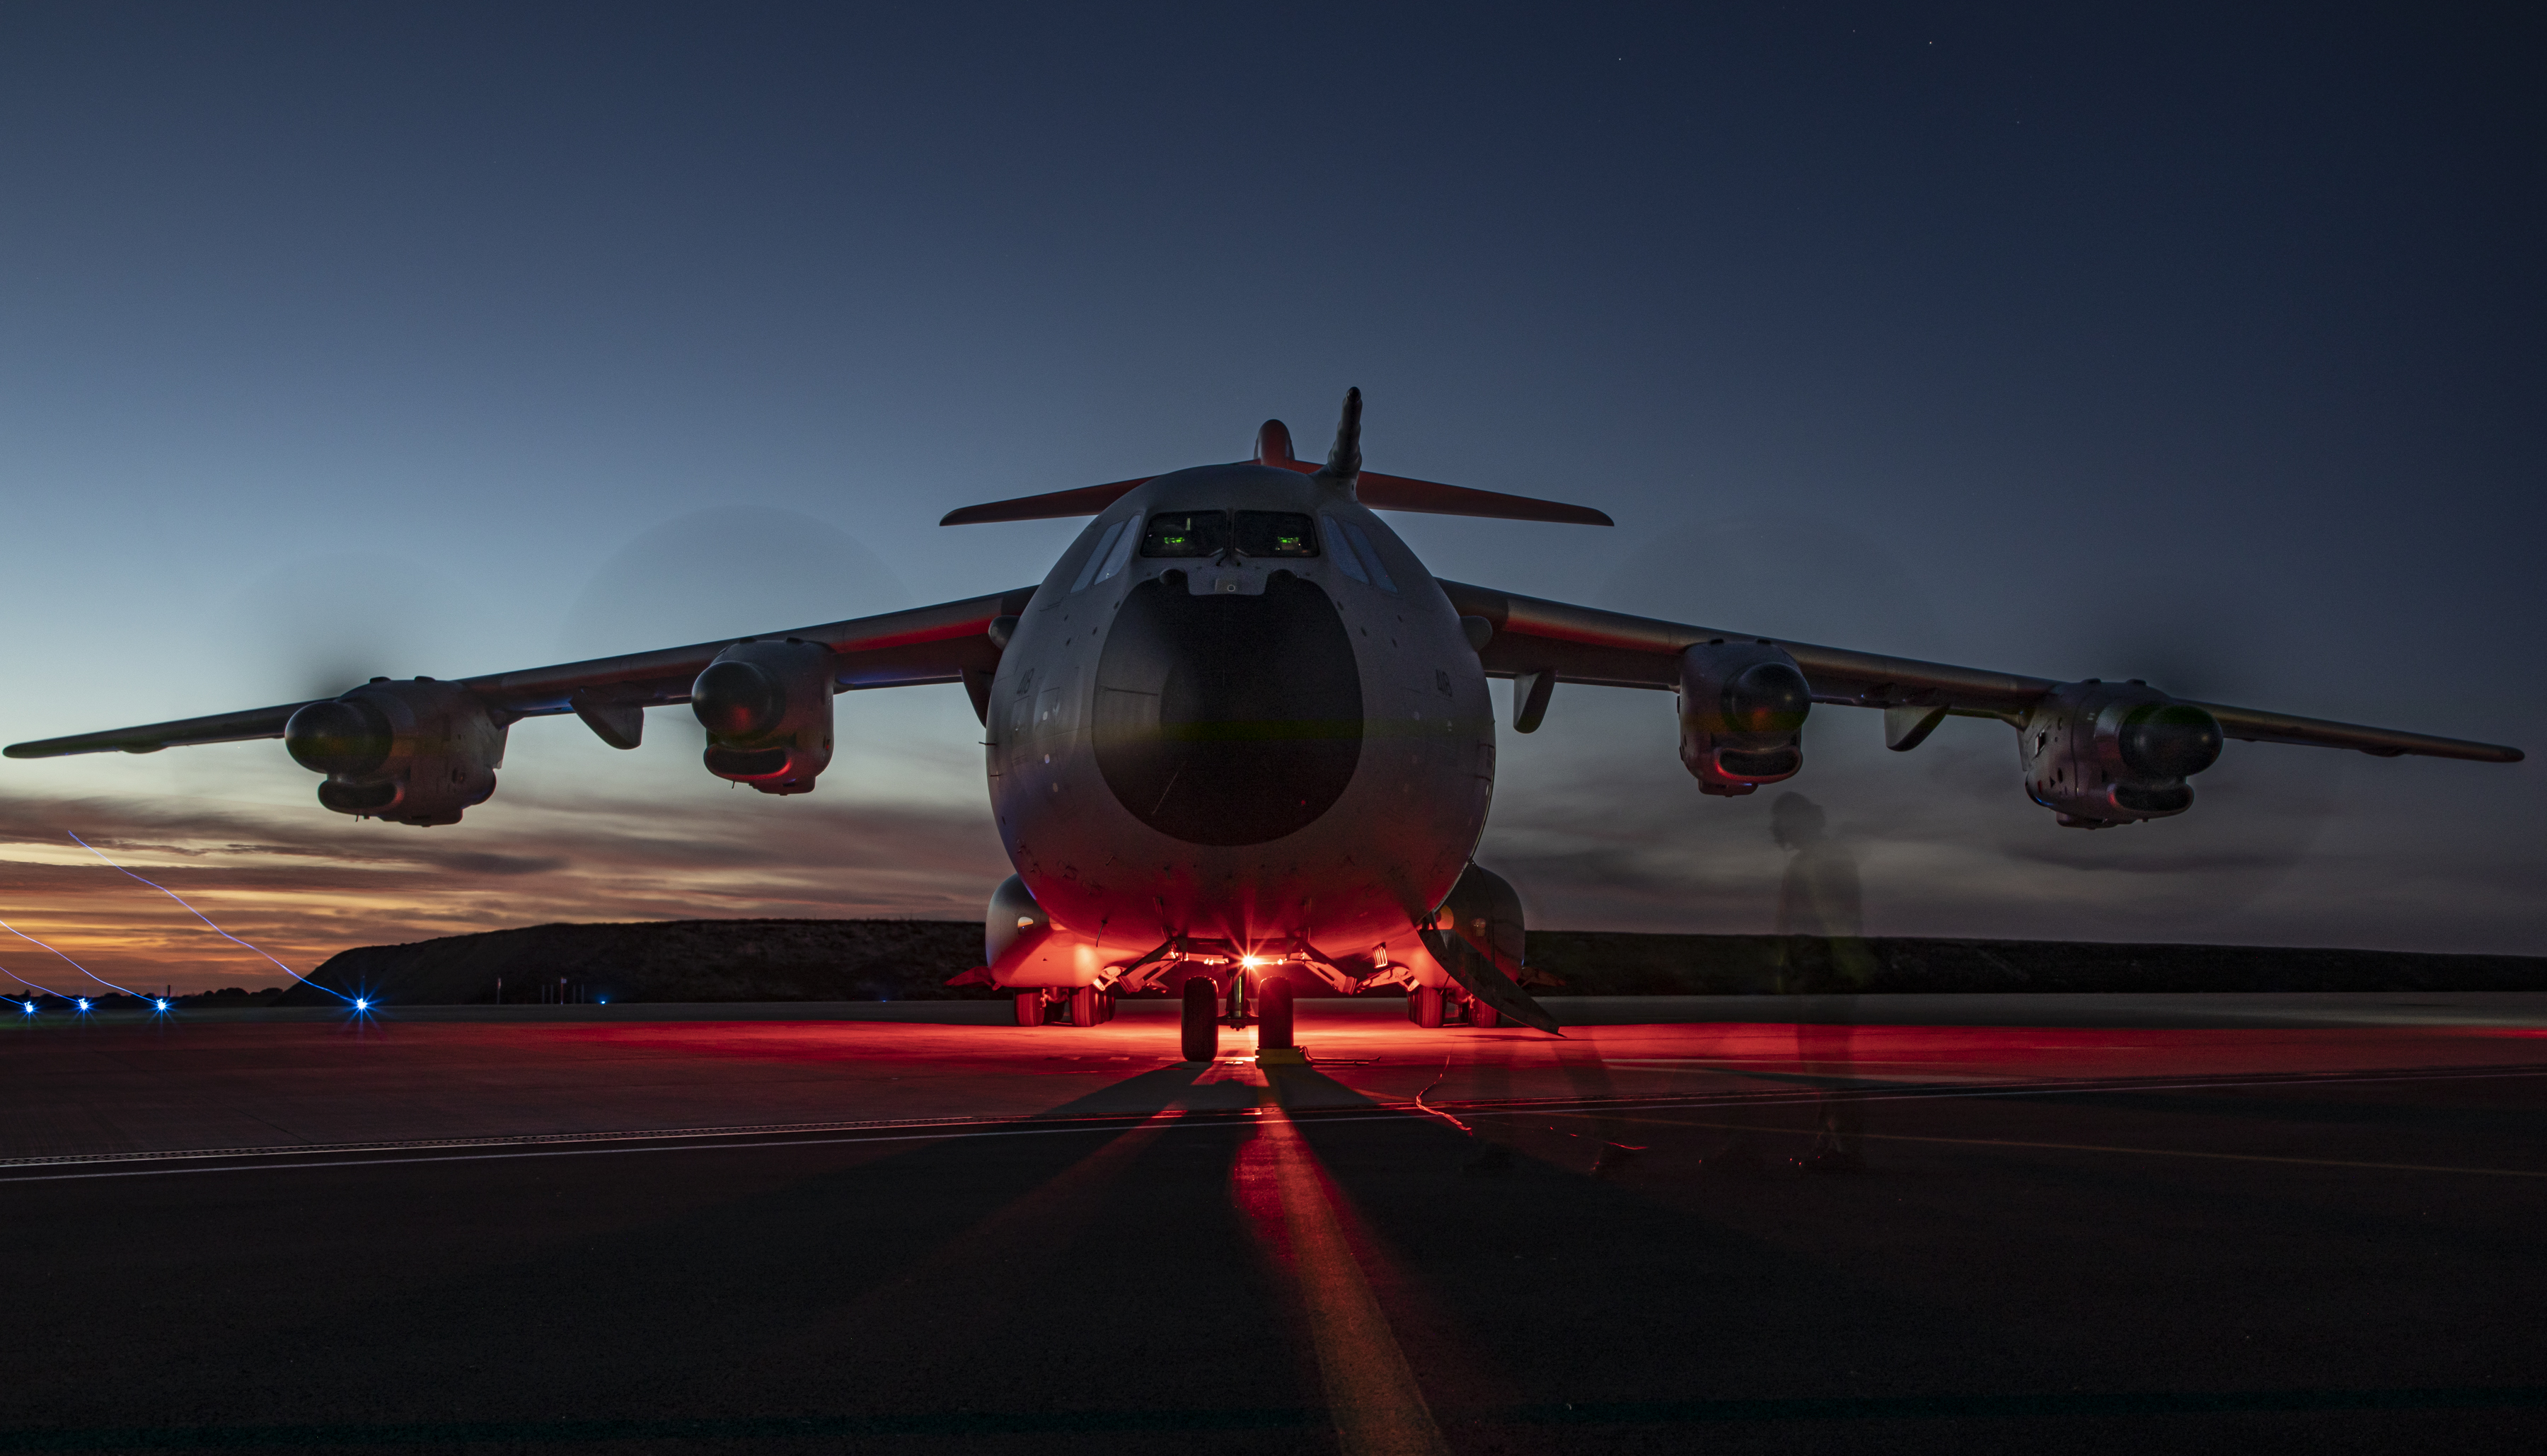 Image shows a RAF Atlas on the airfield with red lights underneath..